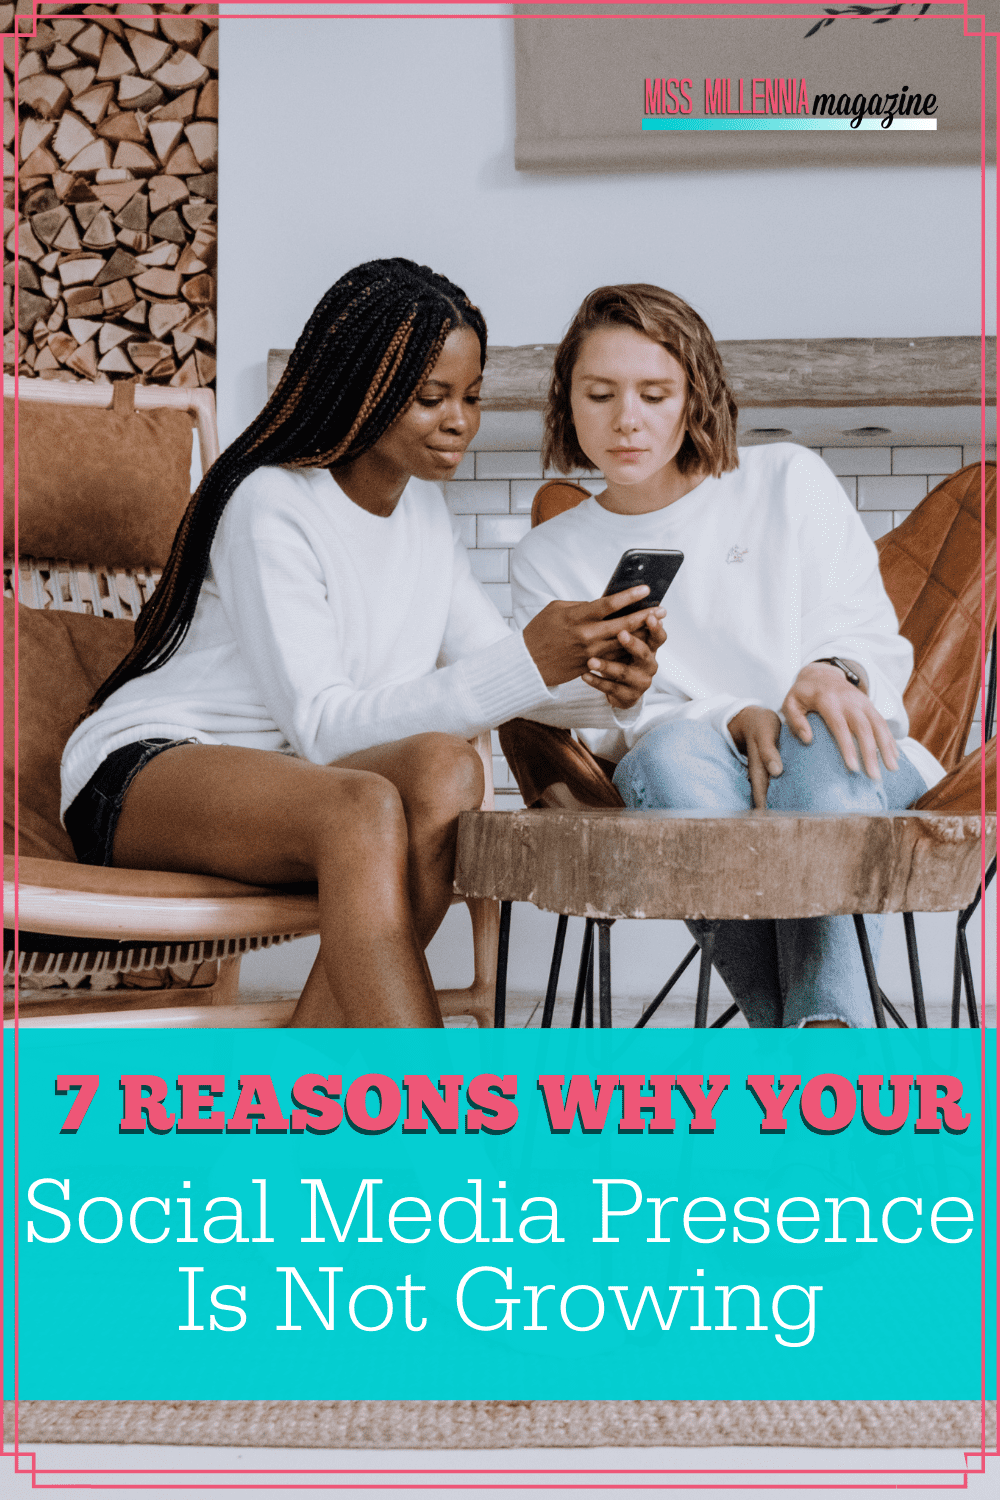 7 Reasons Why Your Social Media Presence Is Not Growing